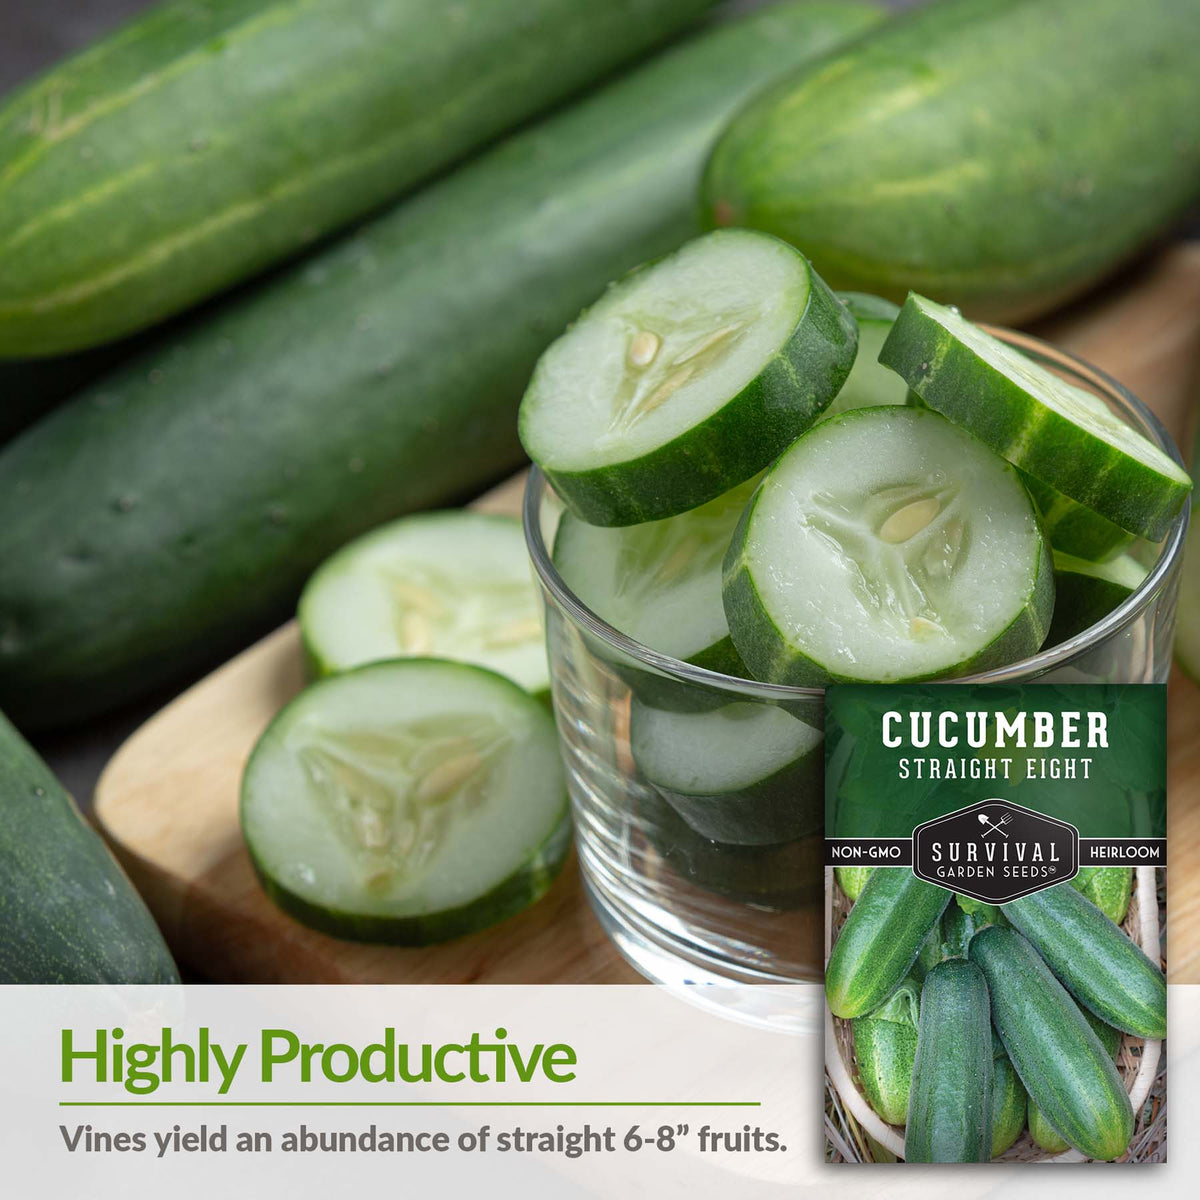 Straight Eight Cucumbers yield an abundance of straight 6-8 in. fruits